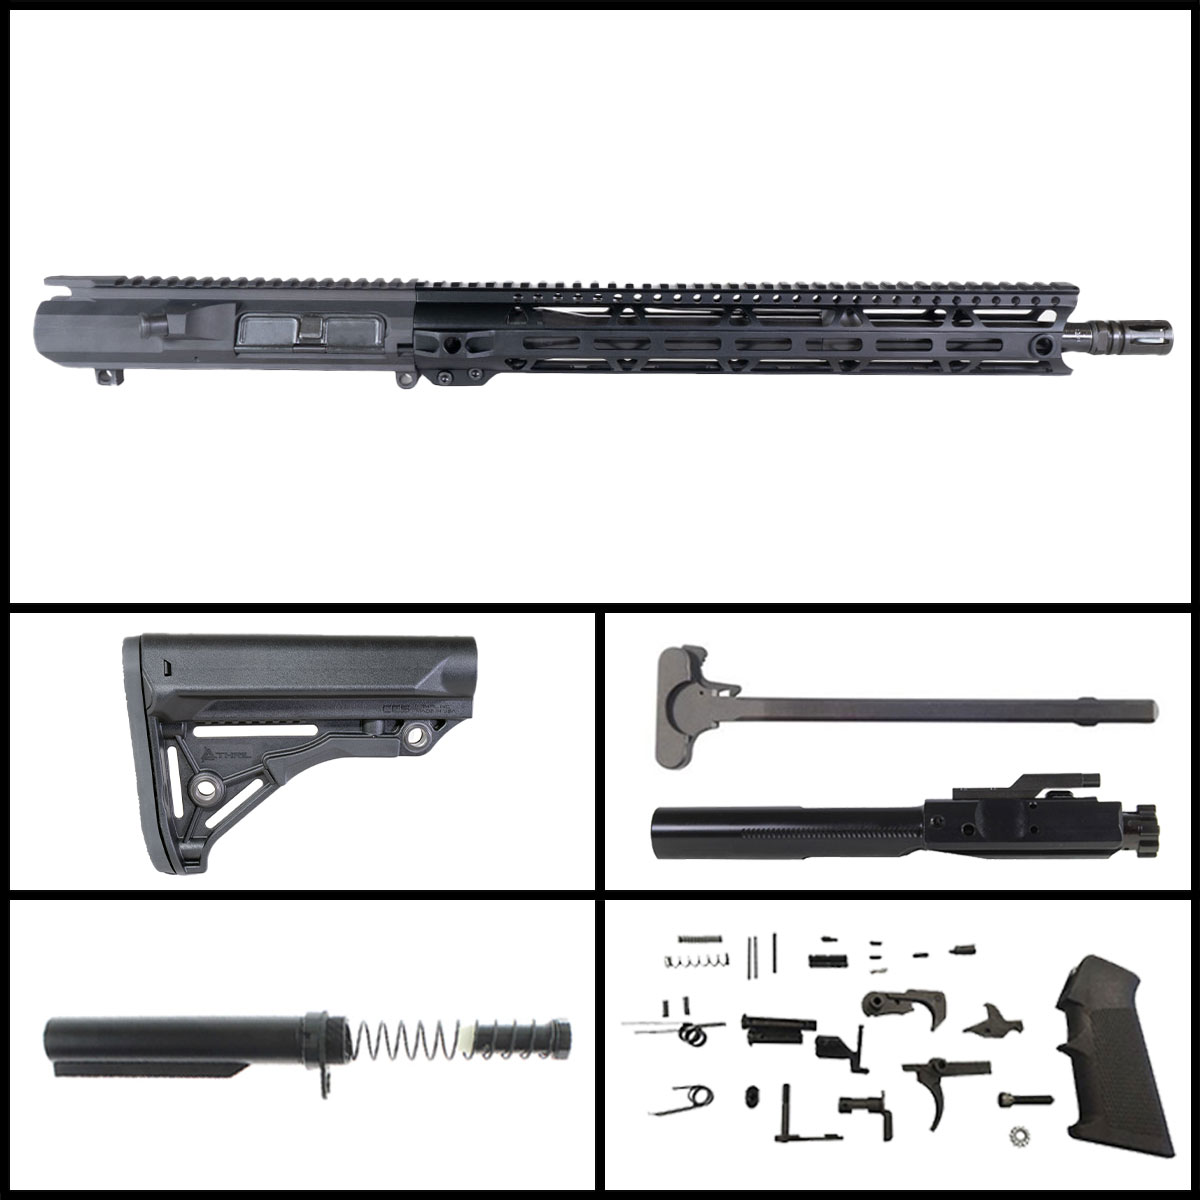 MMC 'Tarnished Expectations' 16-inch LR-308 .308 Win Phosphate Rifle Full Build Kit